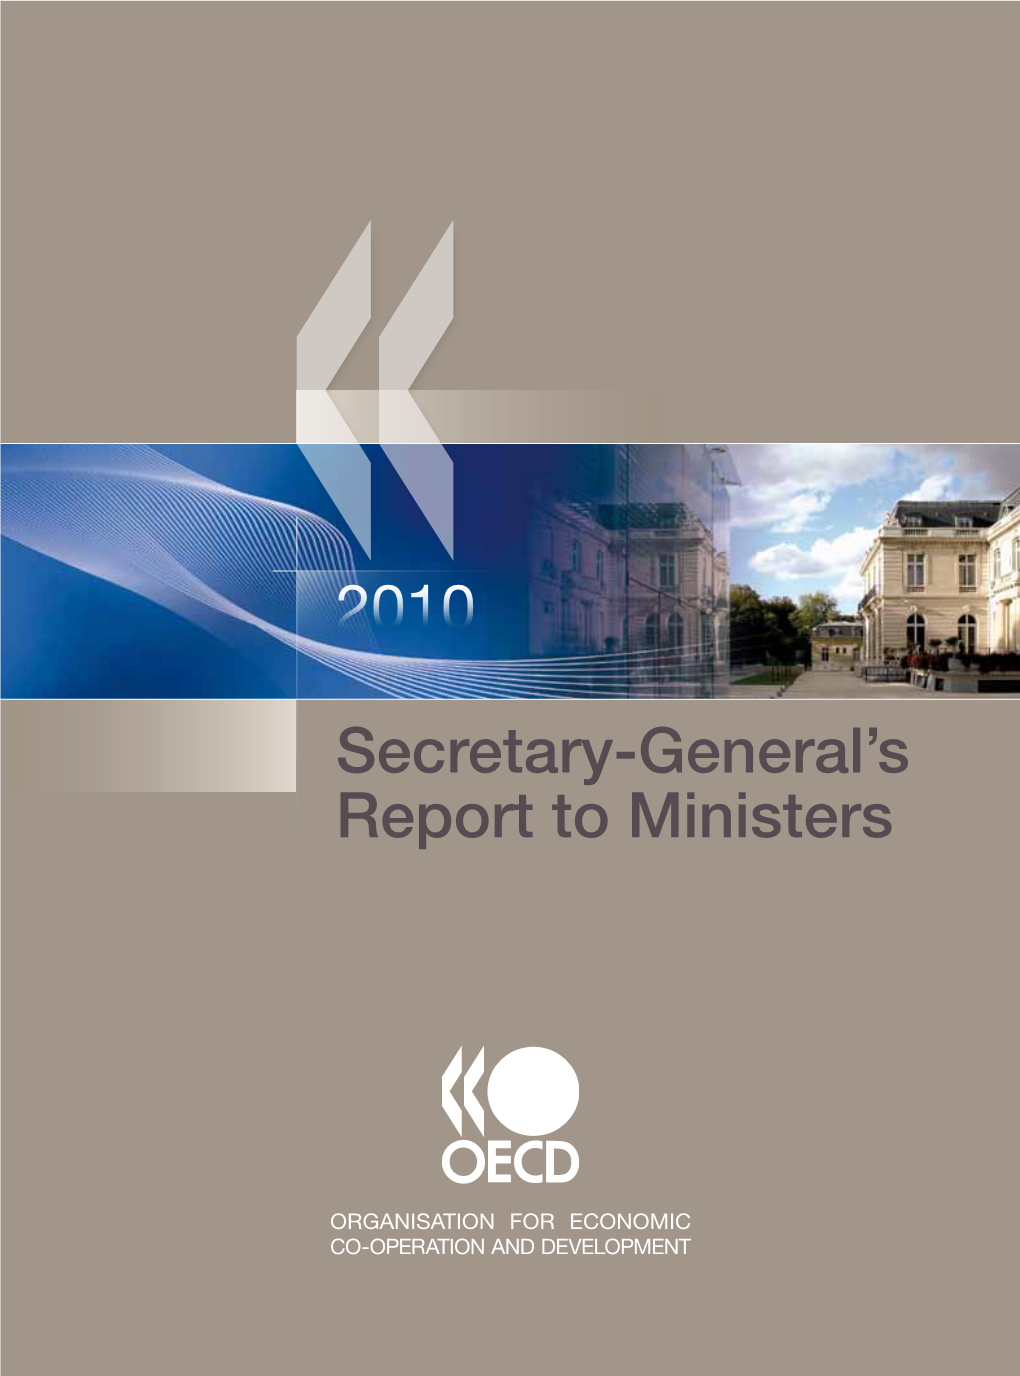 Secretary-General's Report to Ministers 2010